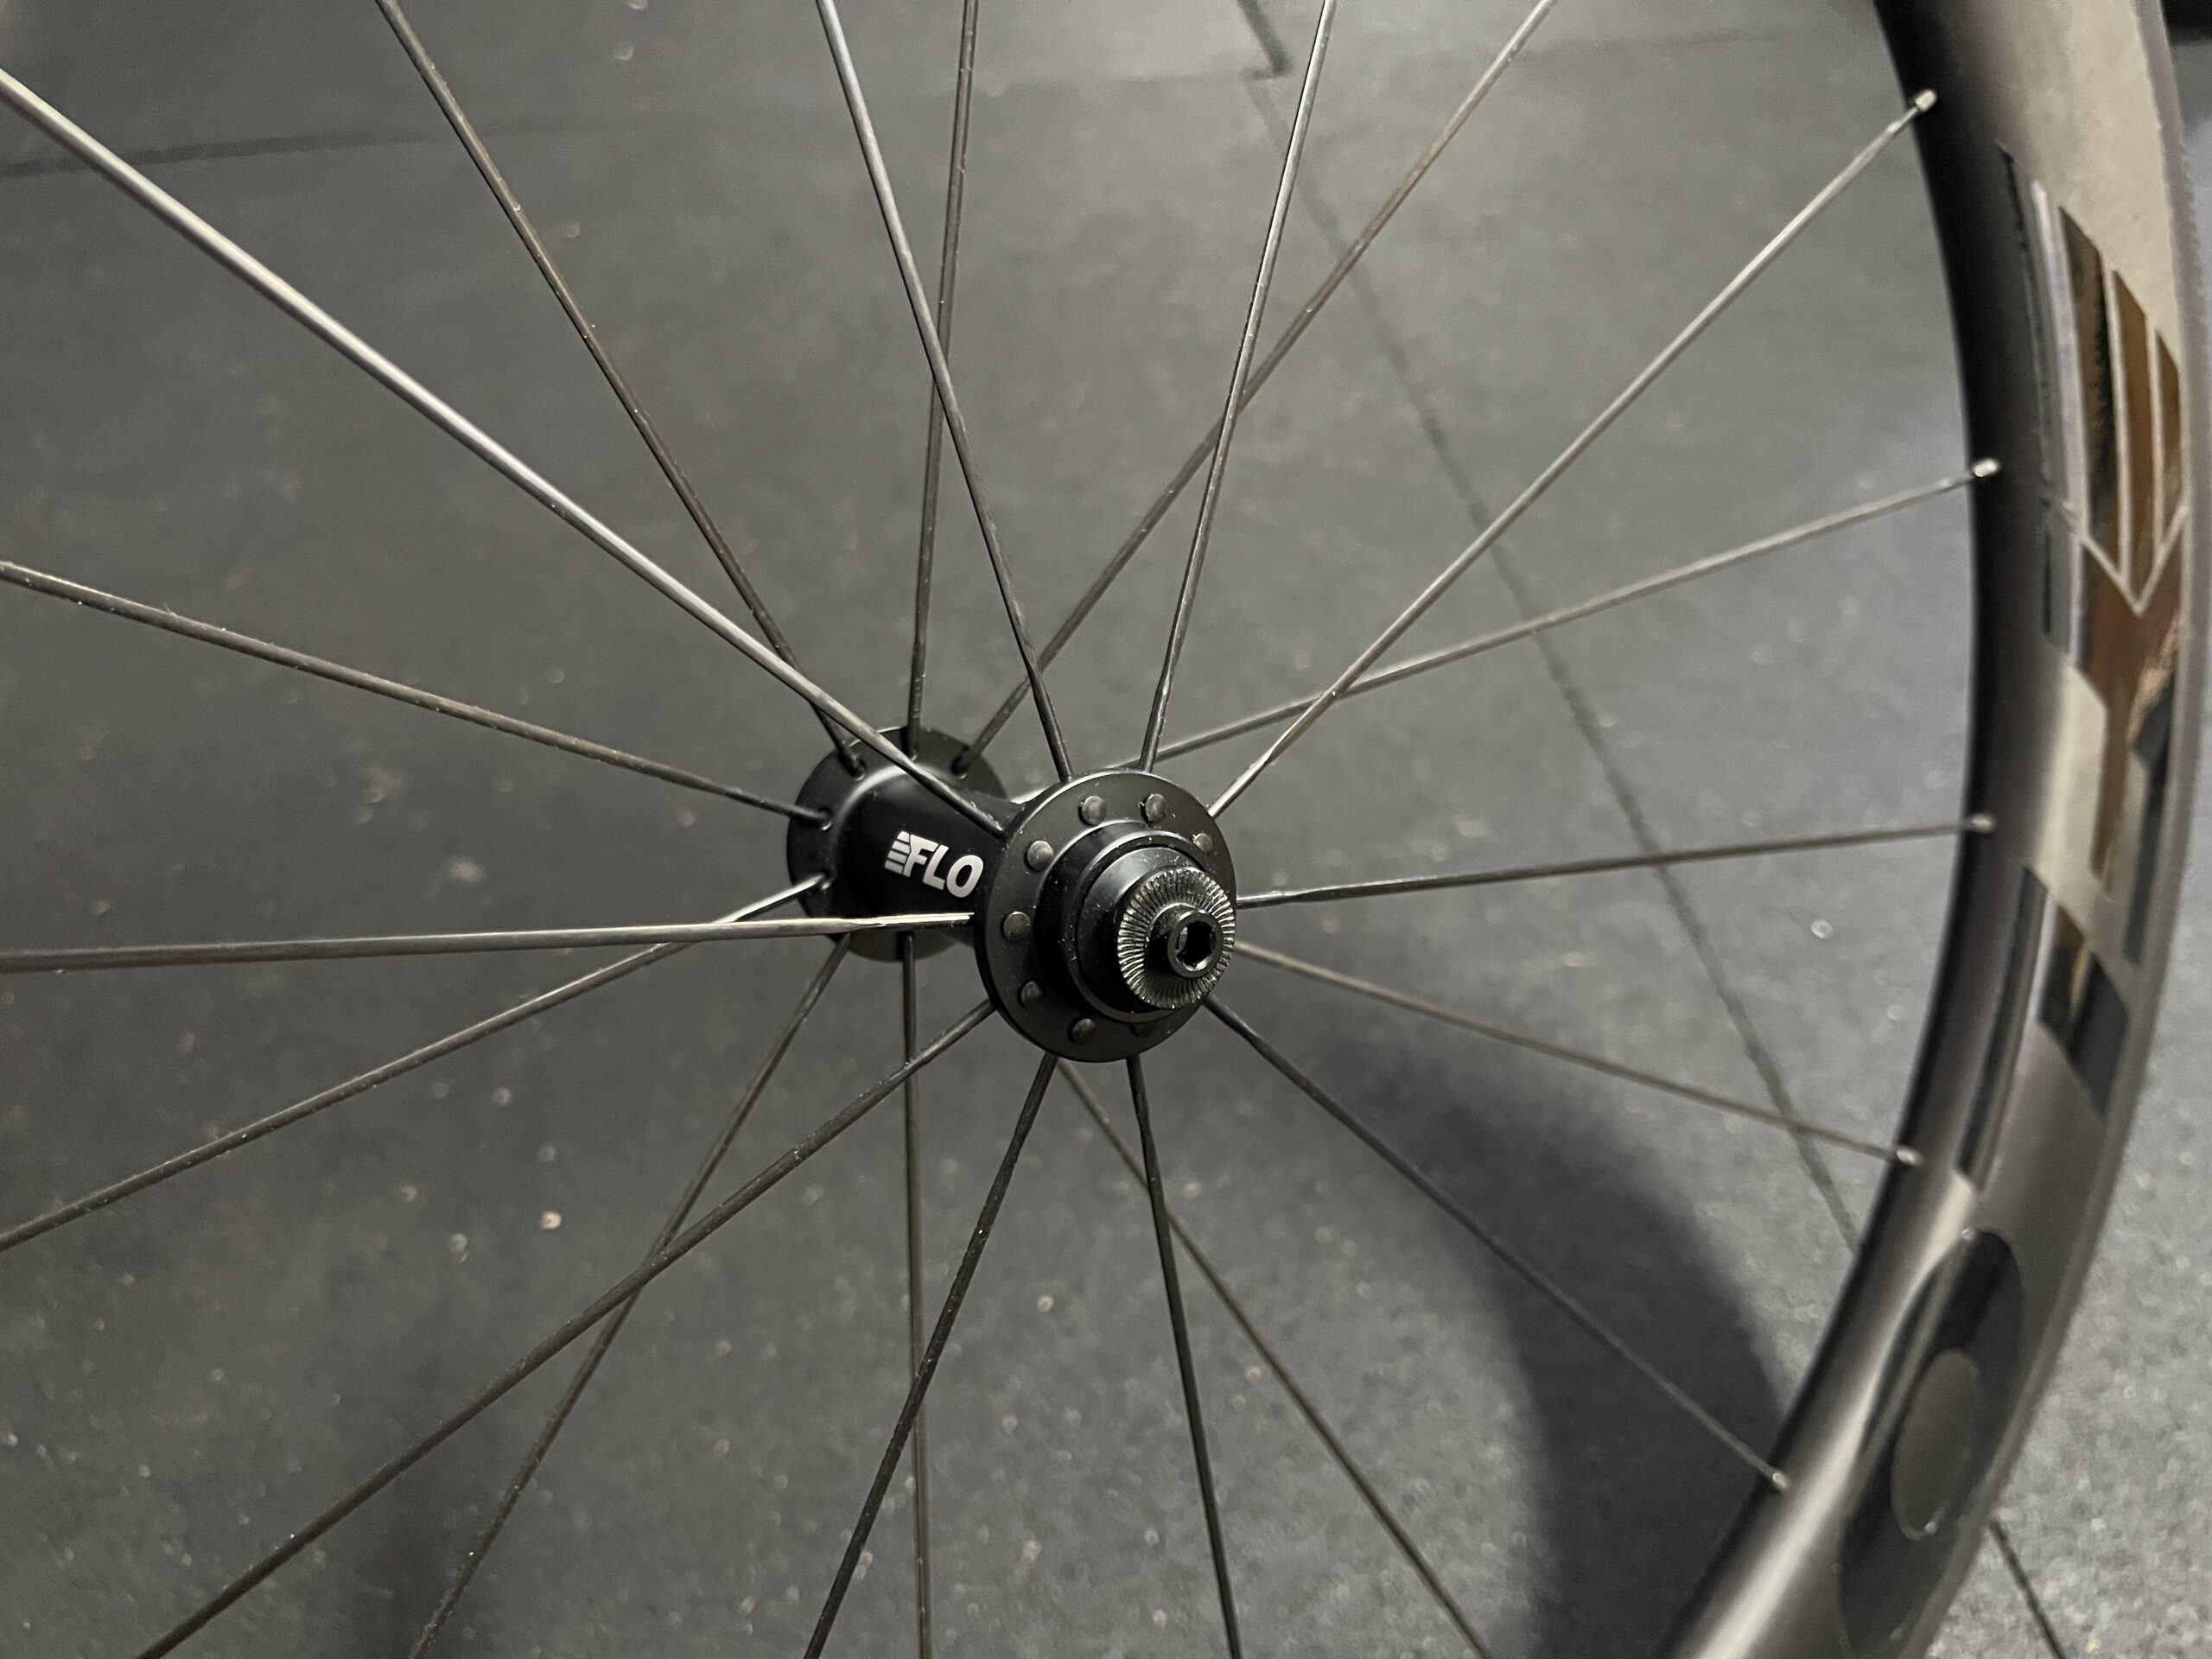 How a Cycling Wheel Supports its Load